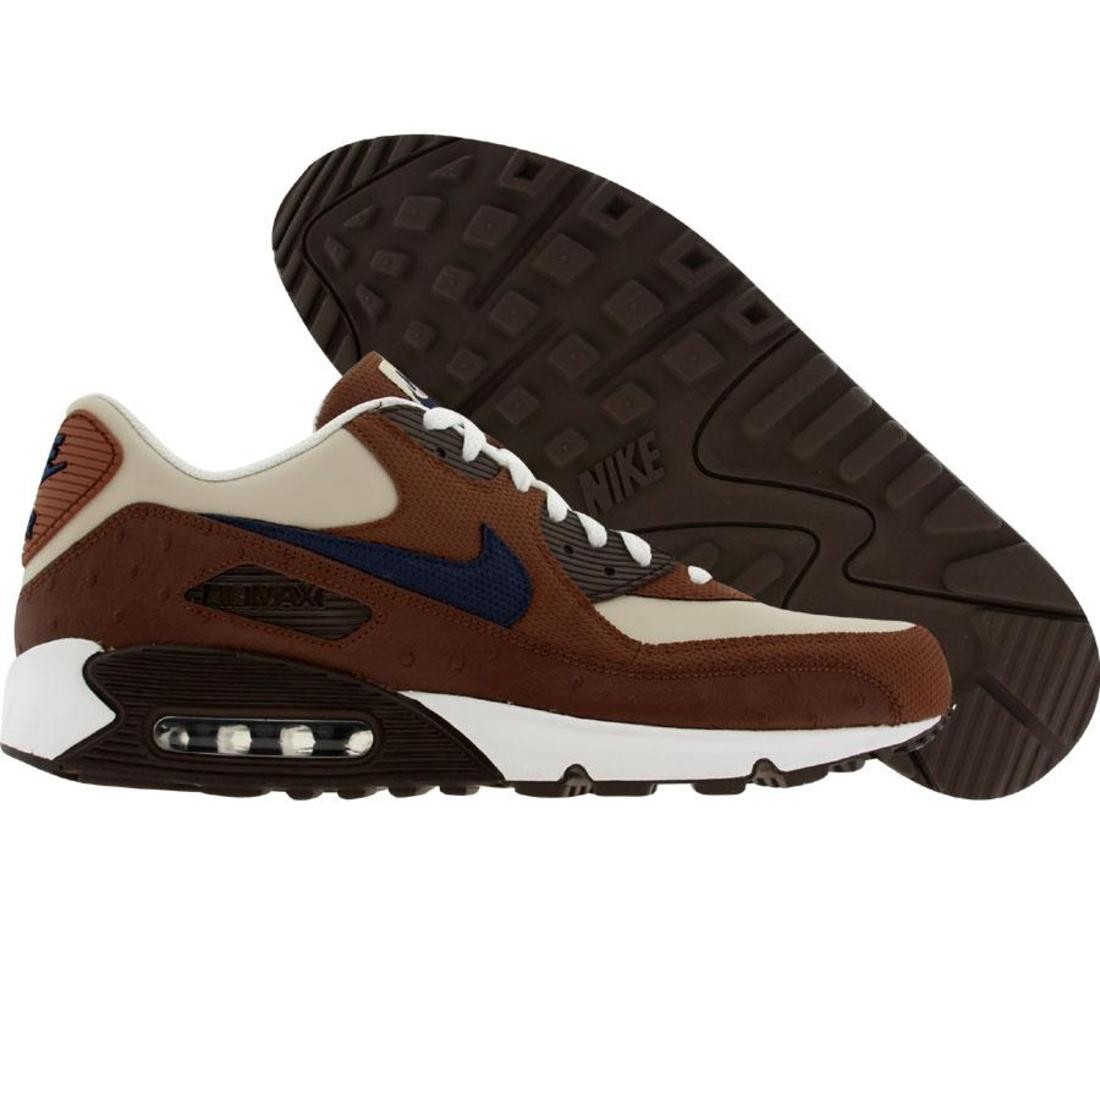 Nike Air Max 90 Leather (rustic / midnight navy / sanddrift)